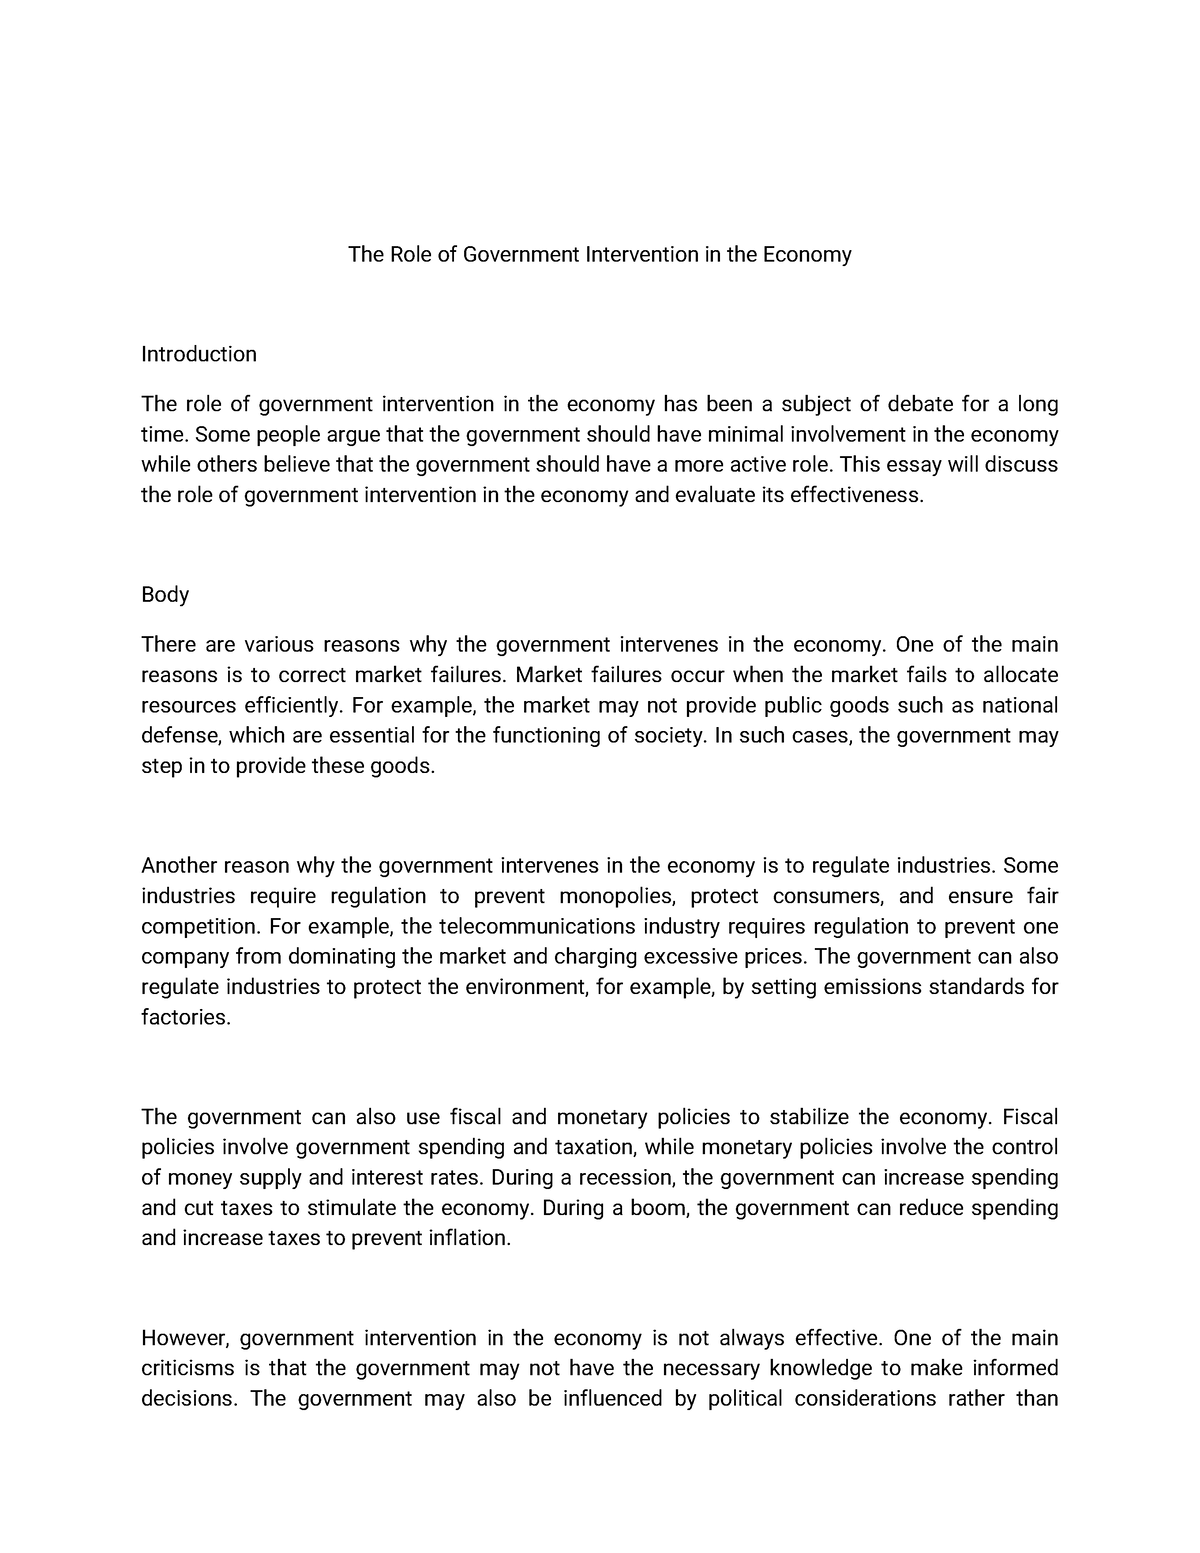 government intervention in the economy essay